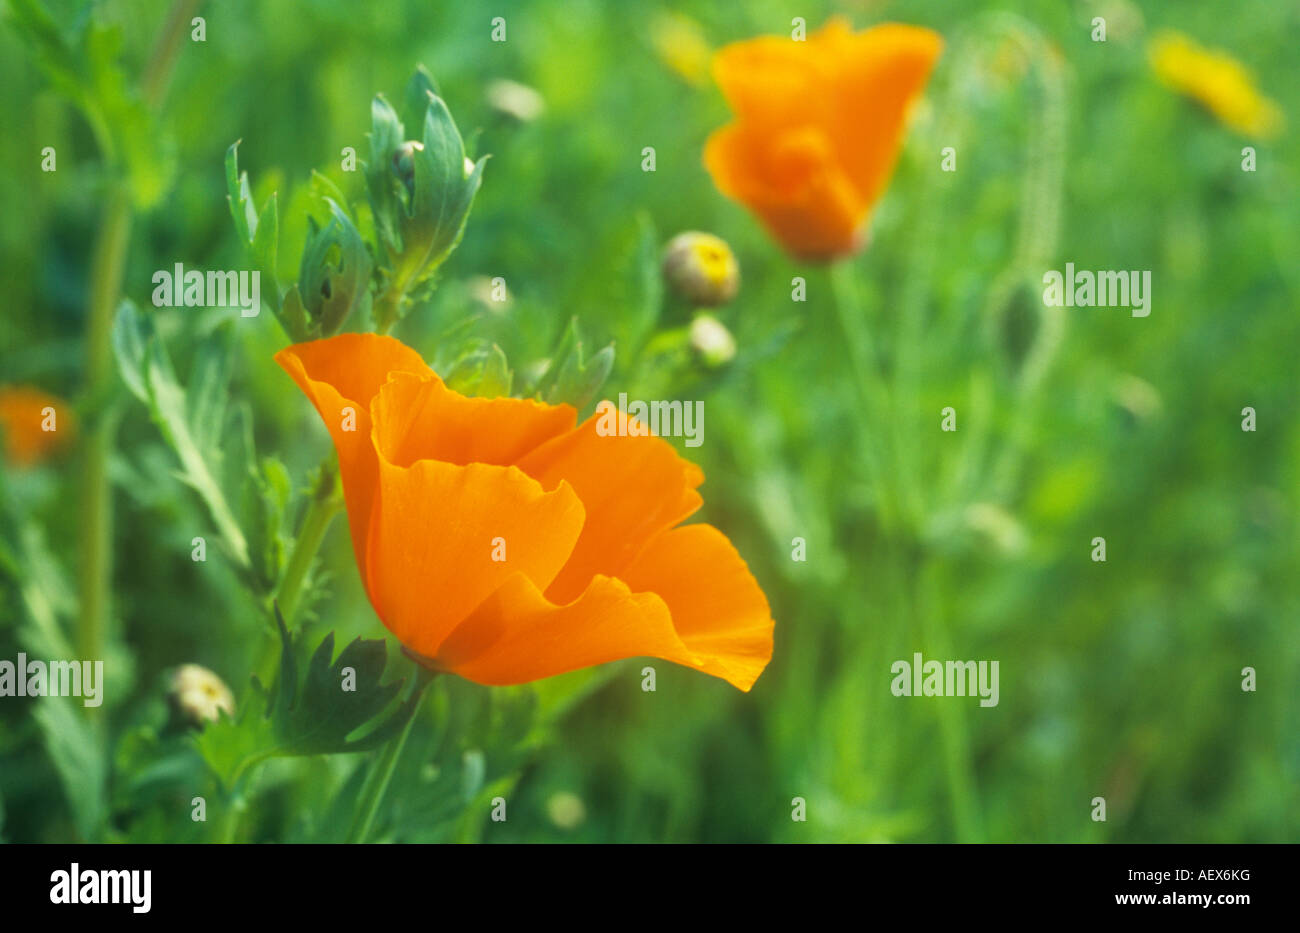 Close up of orange flowerhead of hardy annual plant Californian poppy or Eschscholzia californica with more and Corn marigolds Stock Photo